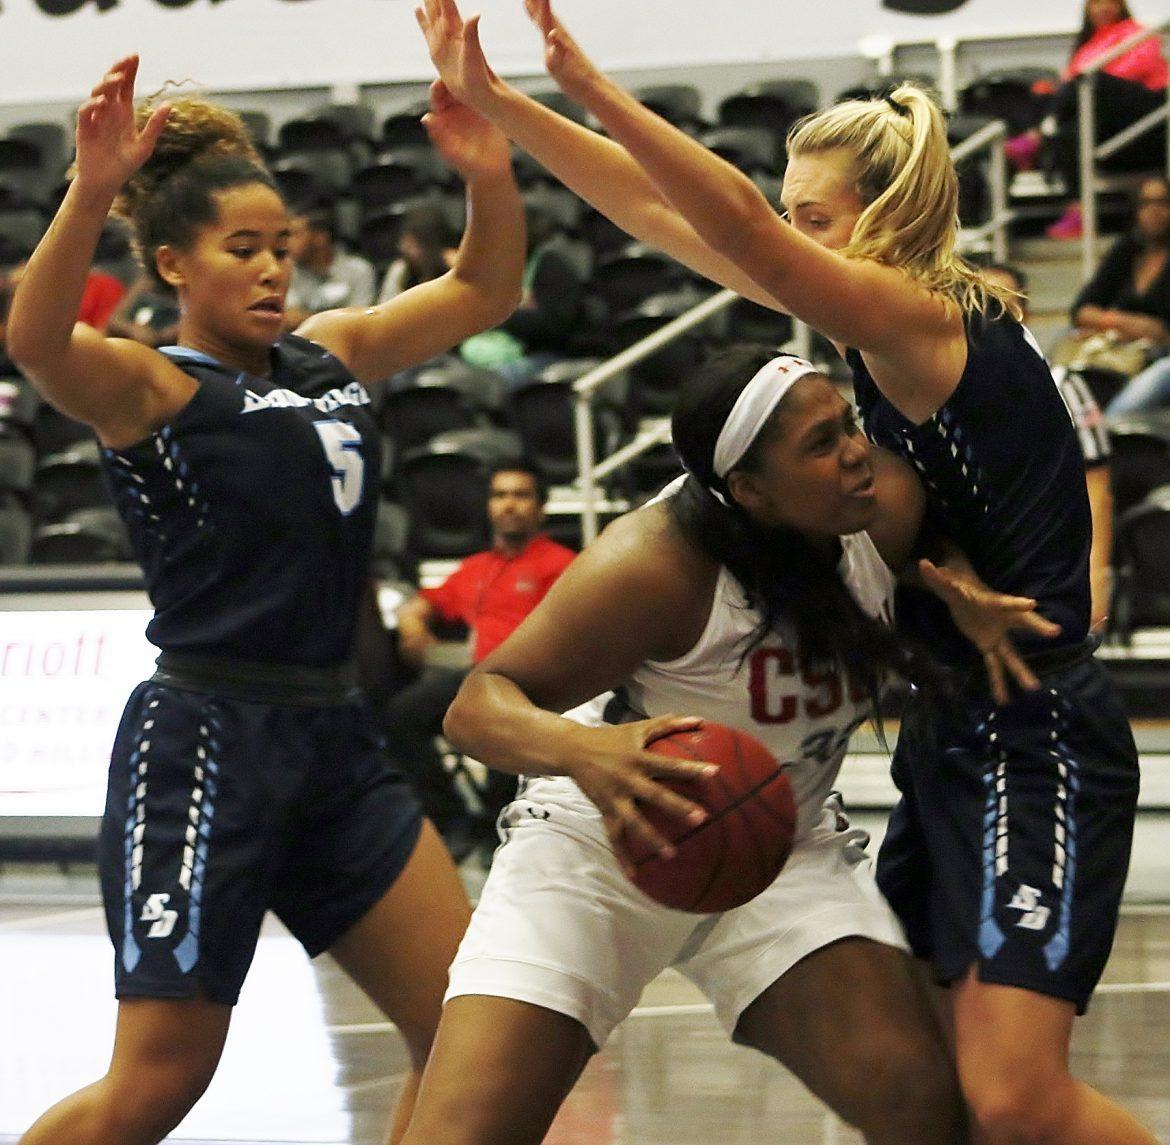 CSUN athlete tries to dribble her way towards the basket past the two girls blocking her